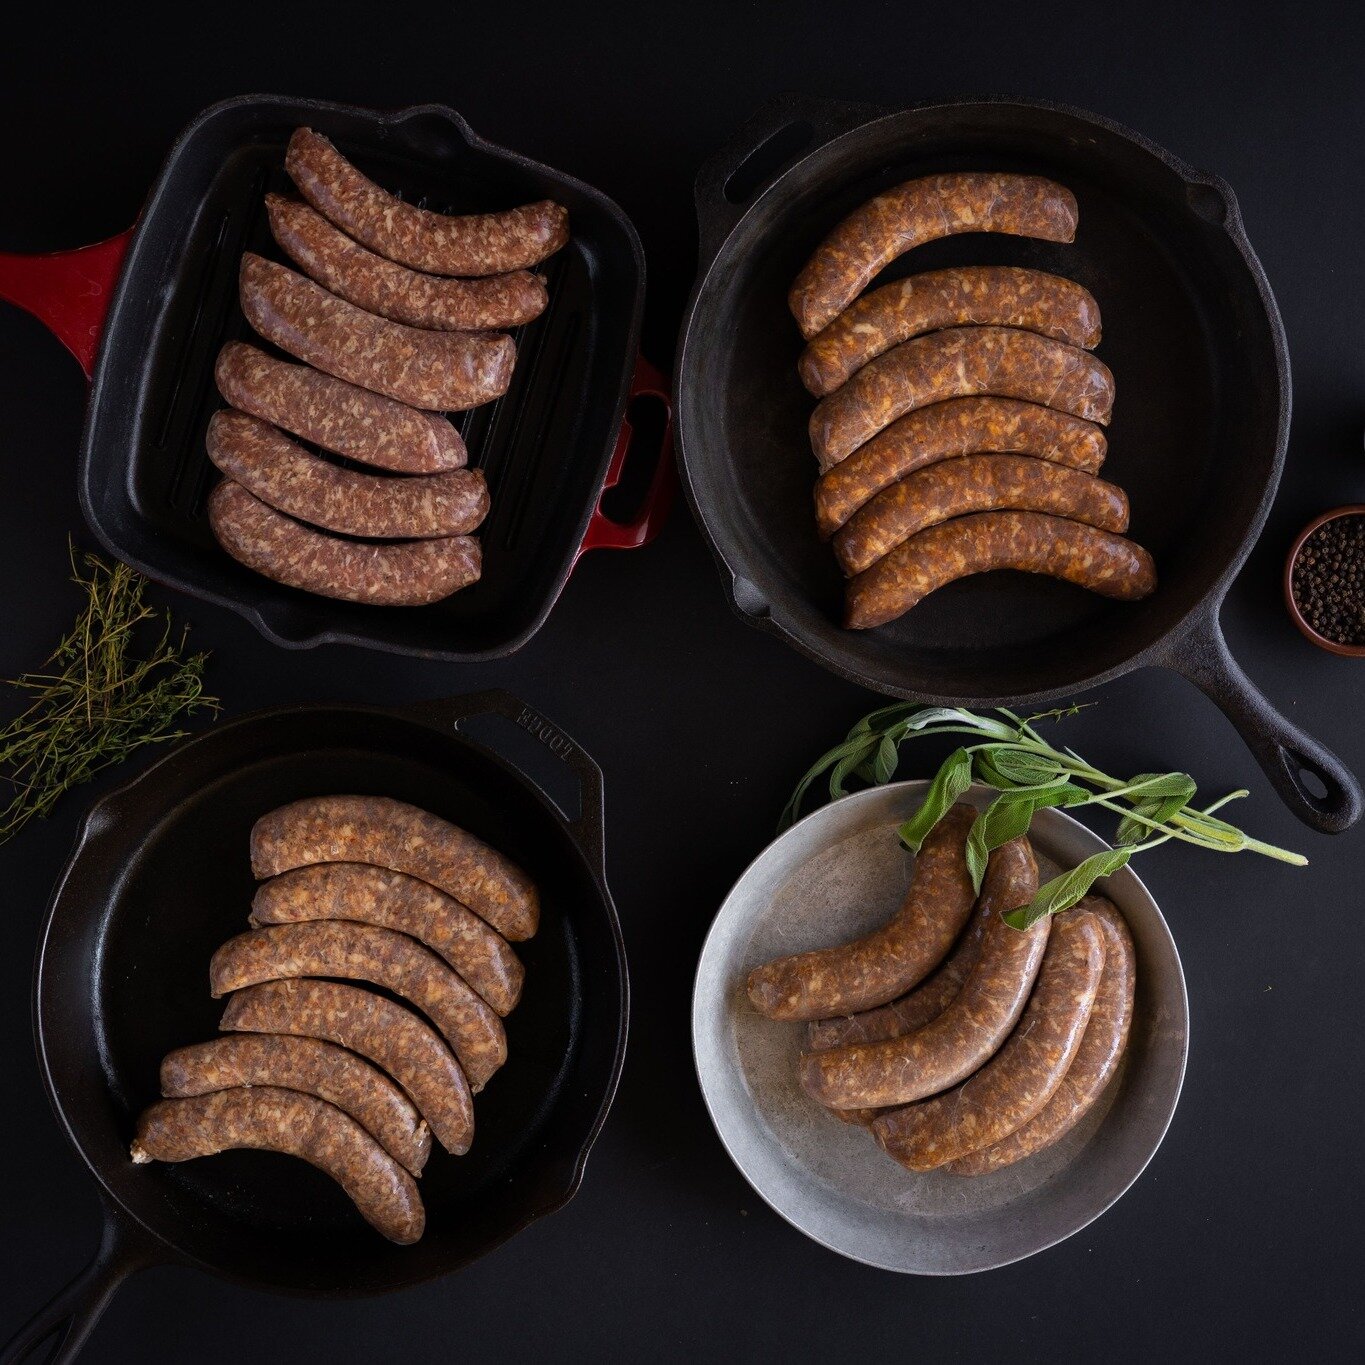 Warmer weather is finally coming our way! 🙌☀️

Choose from our selection of sausage or get one of each with our Sausage Box!

Order online by 3pm for next day pickup or delivery at thecuresk.com/shop, or visit us Mon-Sat from 10am-6pm to shop in sto